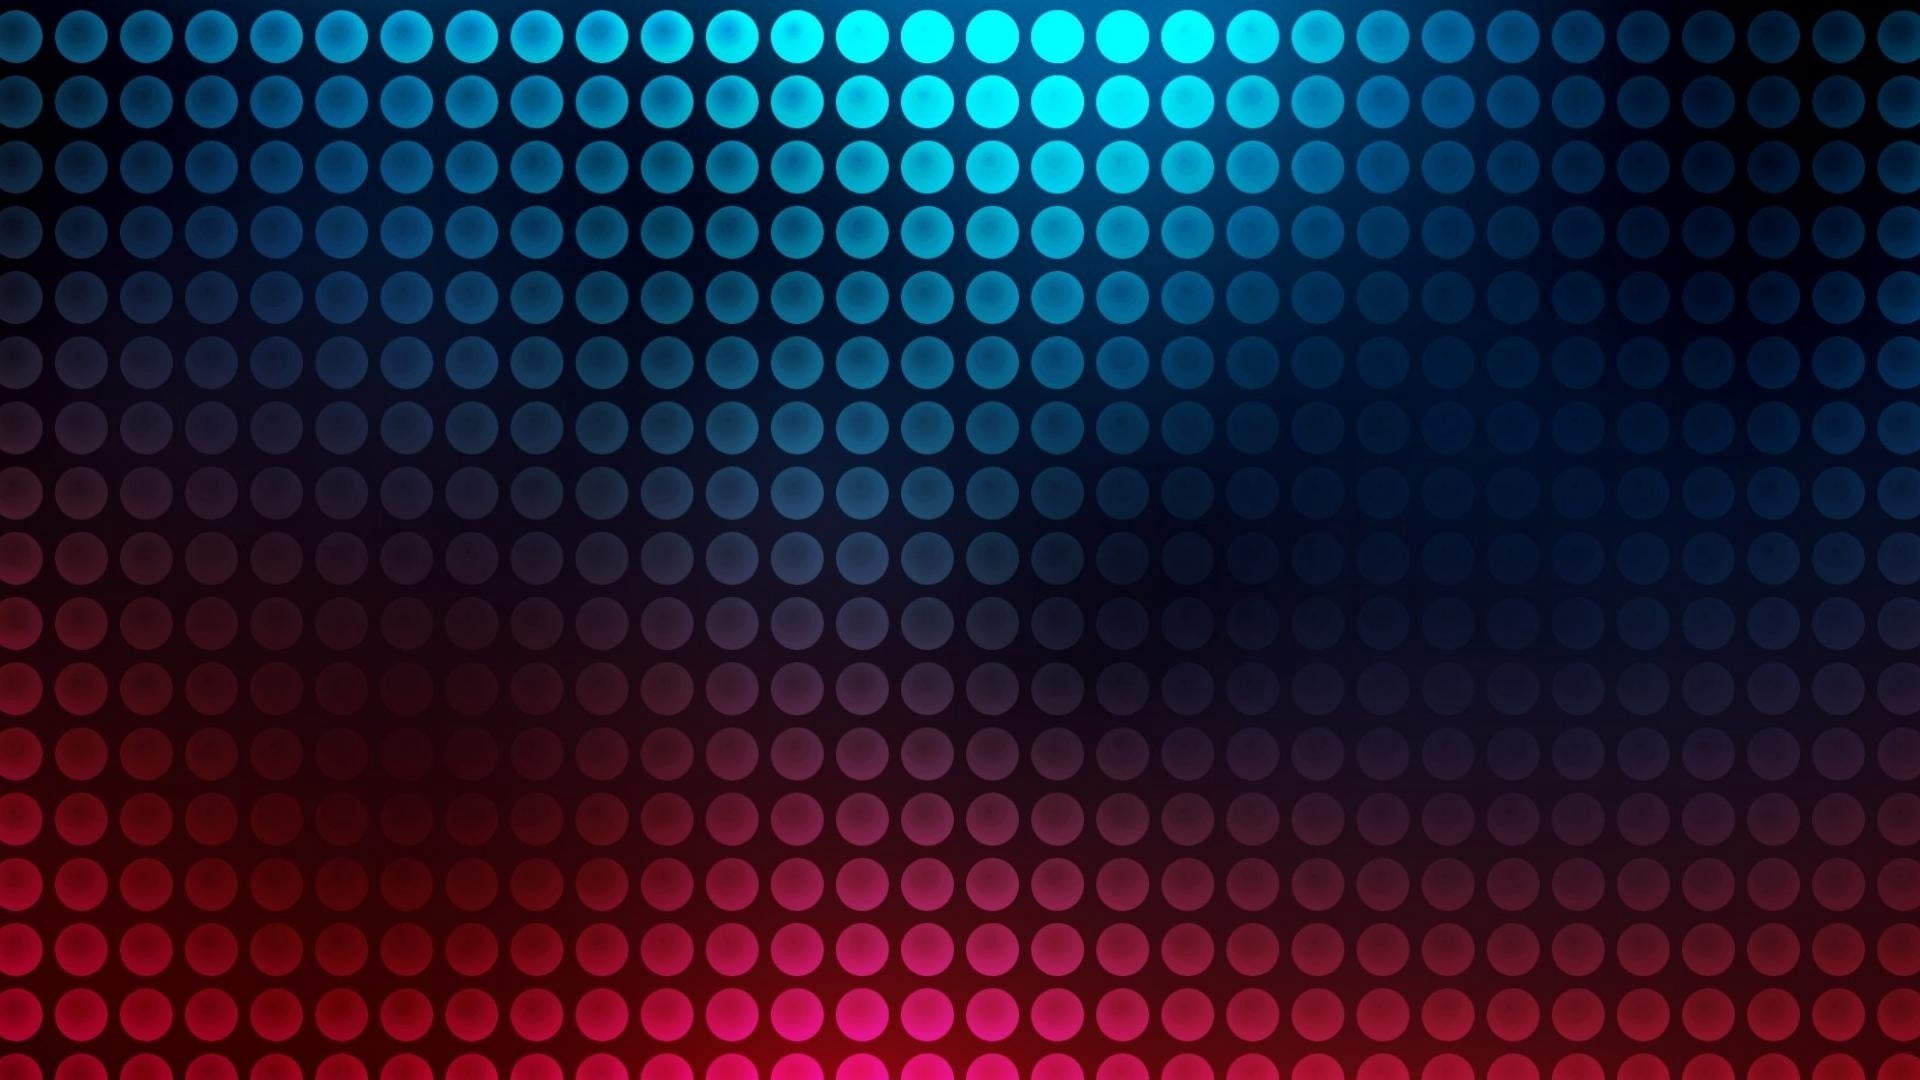 blue and red illustration, background, dots, shadow, spot, backgrounds